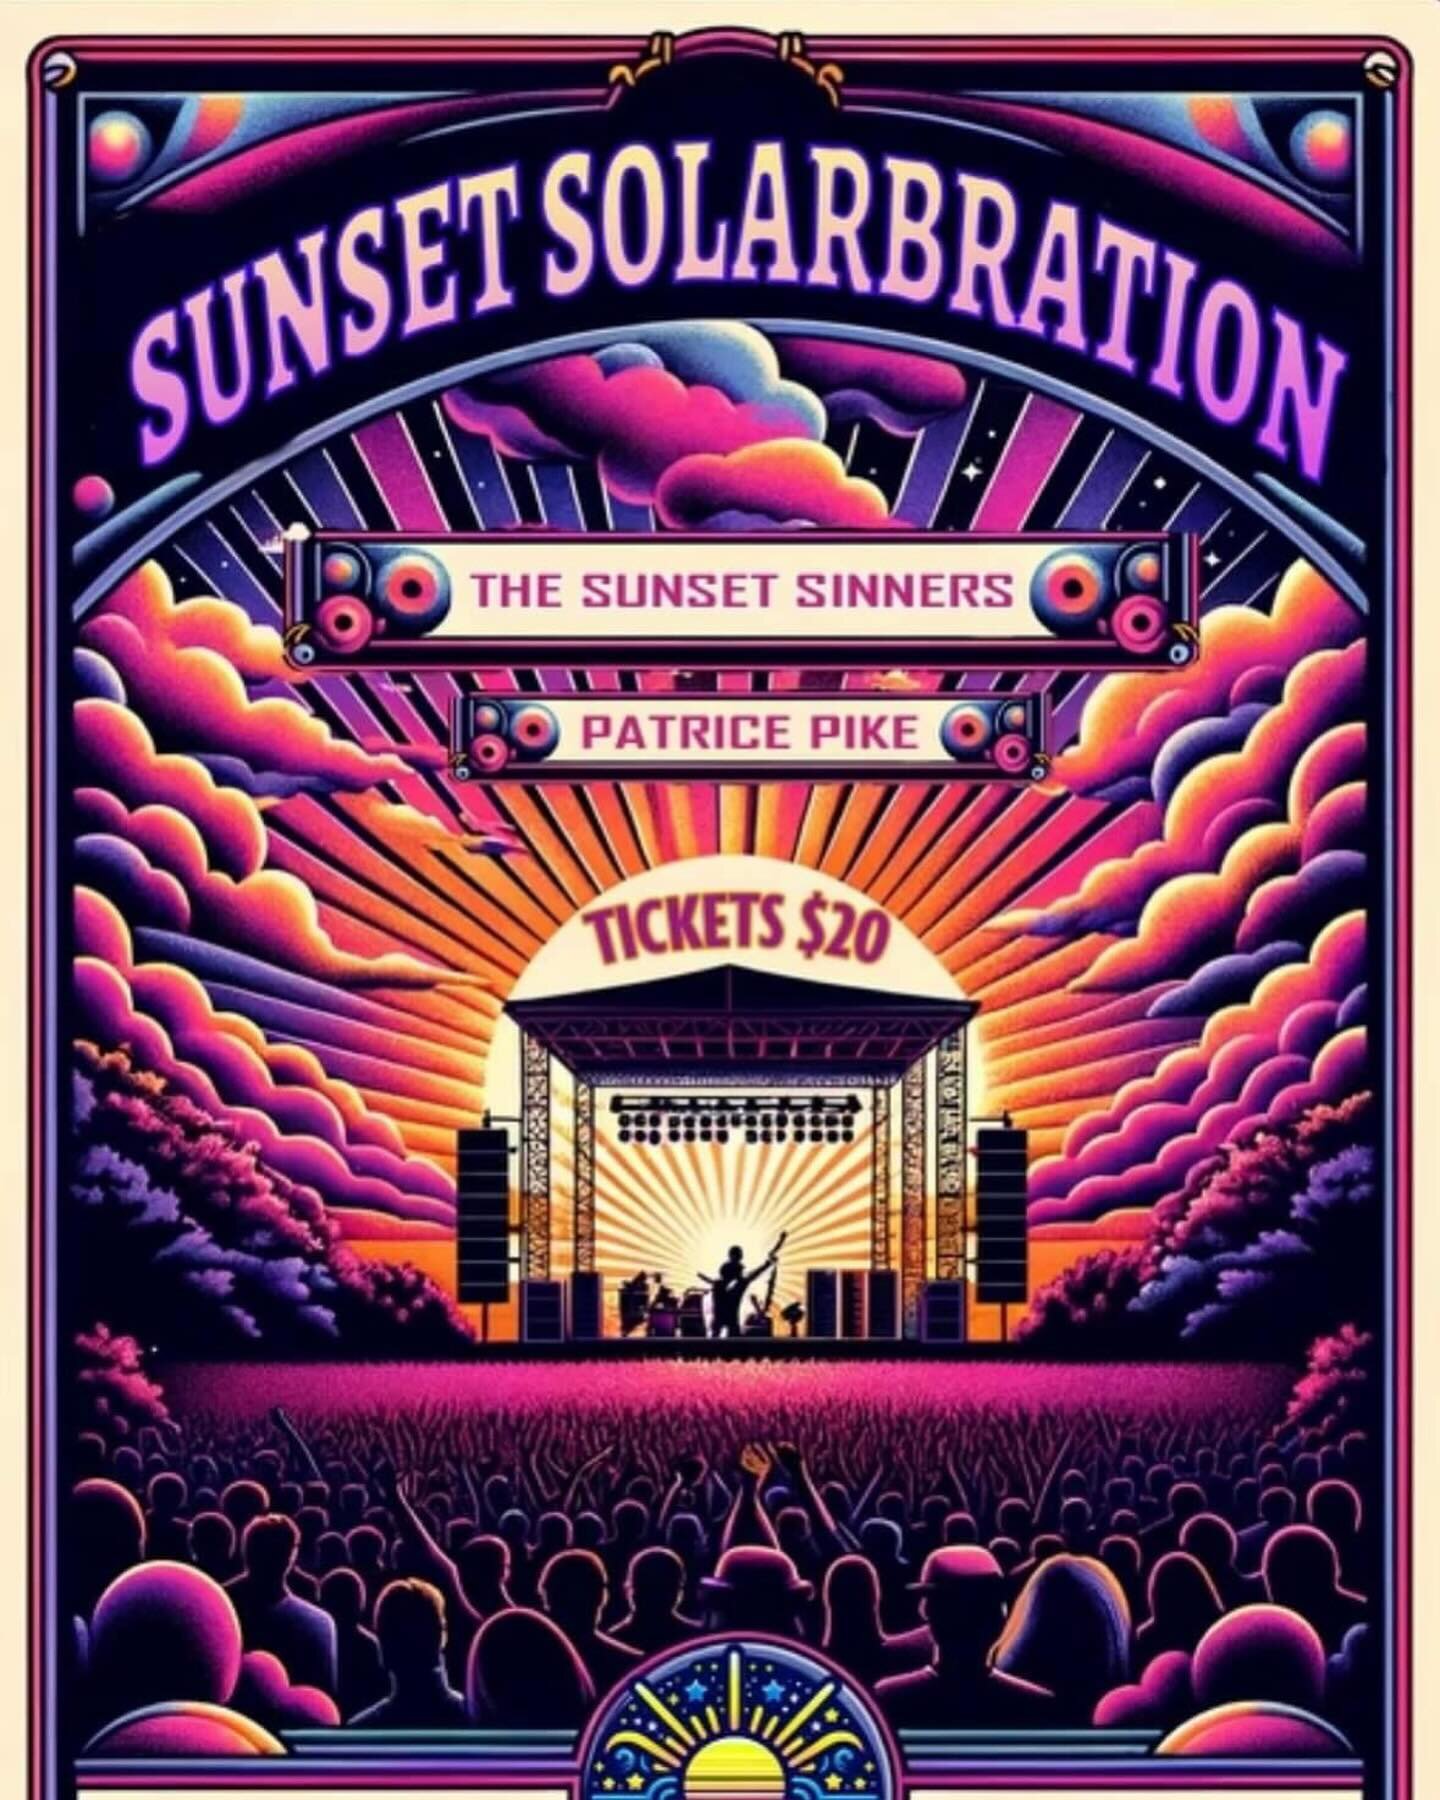 Sinner Nation - We&rsquo;ll be Headlining the Sunset Solarbration Festival in Texarkana on April 7th! We&rsquo;ll be part of this historic celestial Solar Eclipse event on 4/8/24. Texarkana(Arkansas/ Texas) is expecting an additional 100K people to w